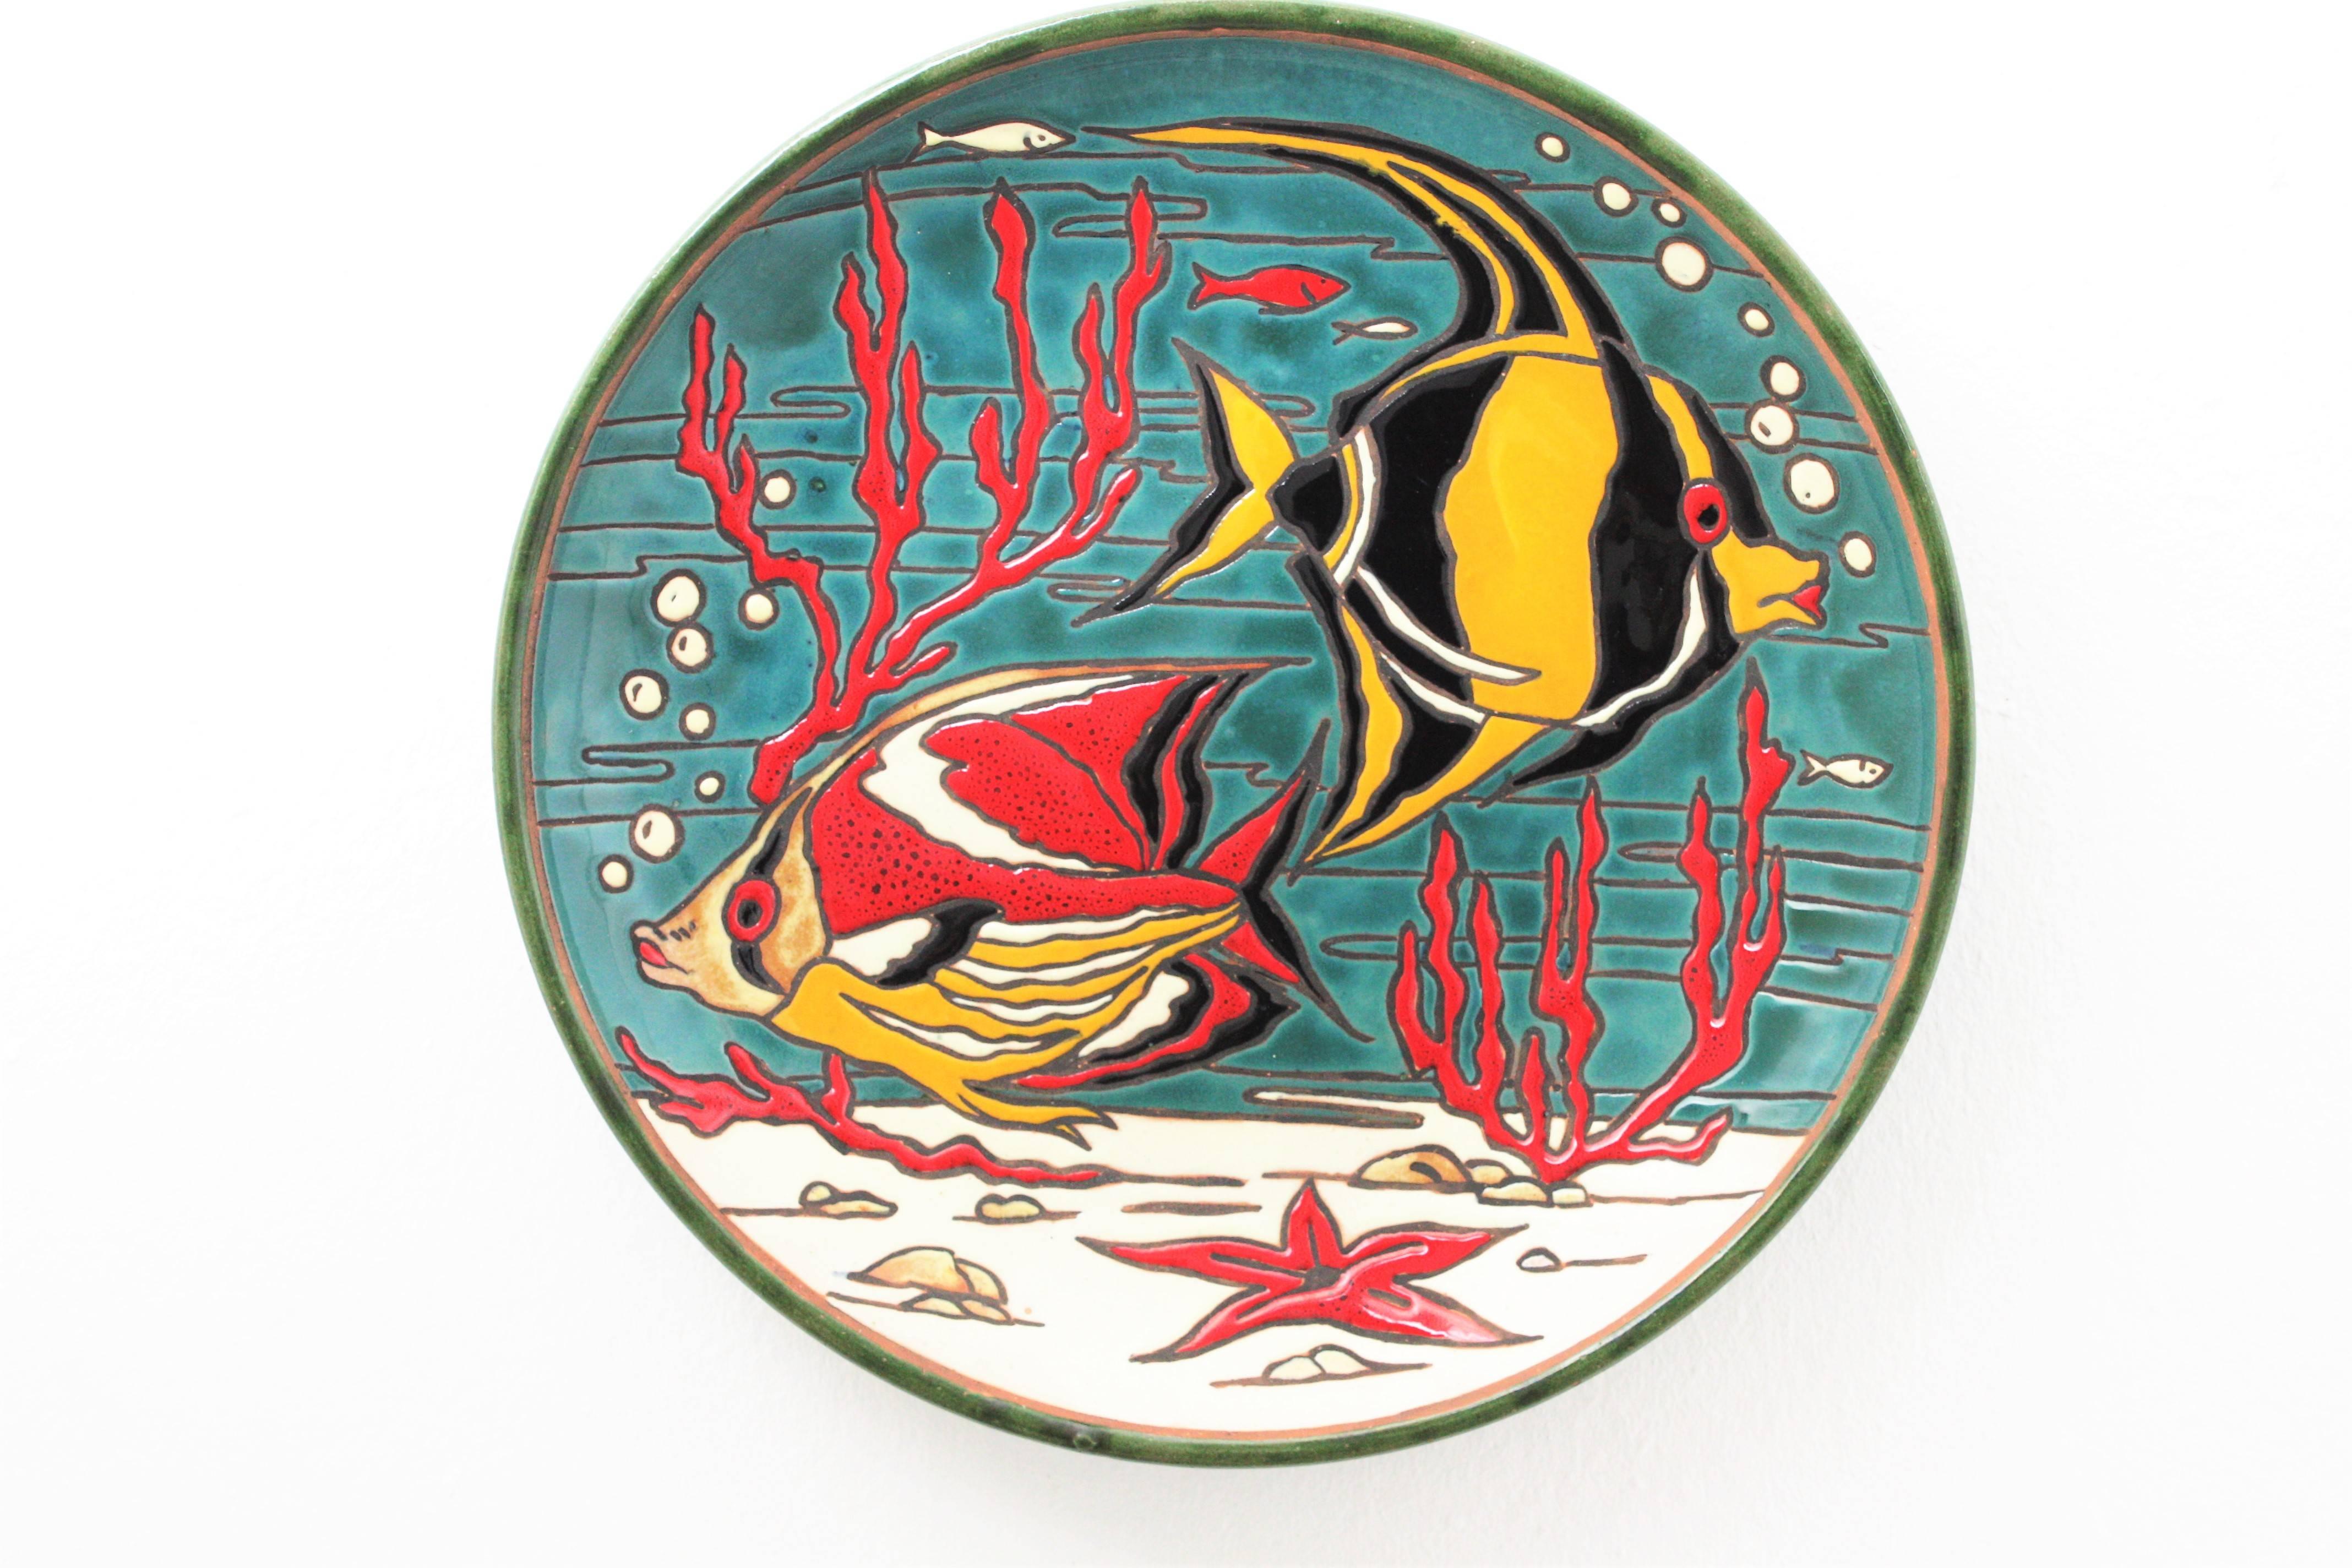 A colorful glaced ceramic large plate or platter with a sea depth landscape decoration in red, yellow, blue, black and white tones. Spain, 1950s.
The edge and the back of the platter is made in green glazed ceramic.
Lovely to hang it on the wall